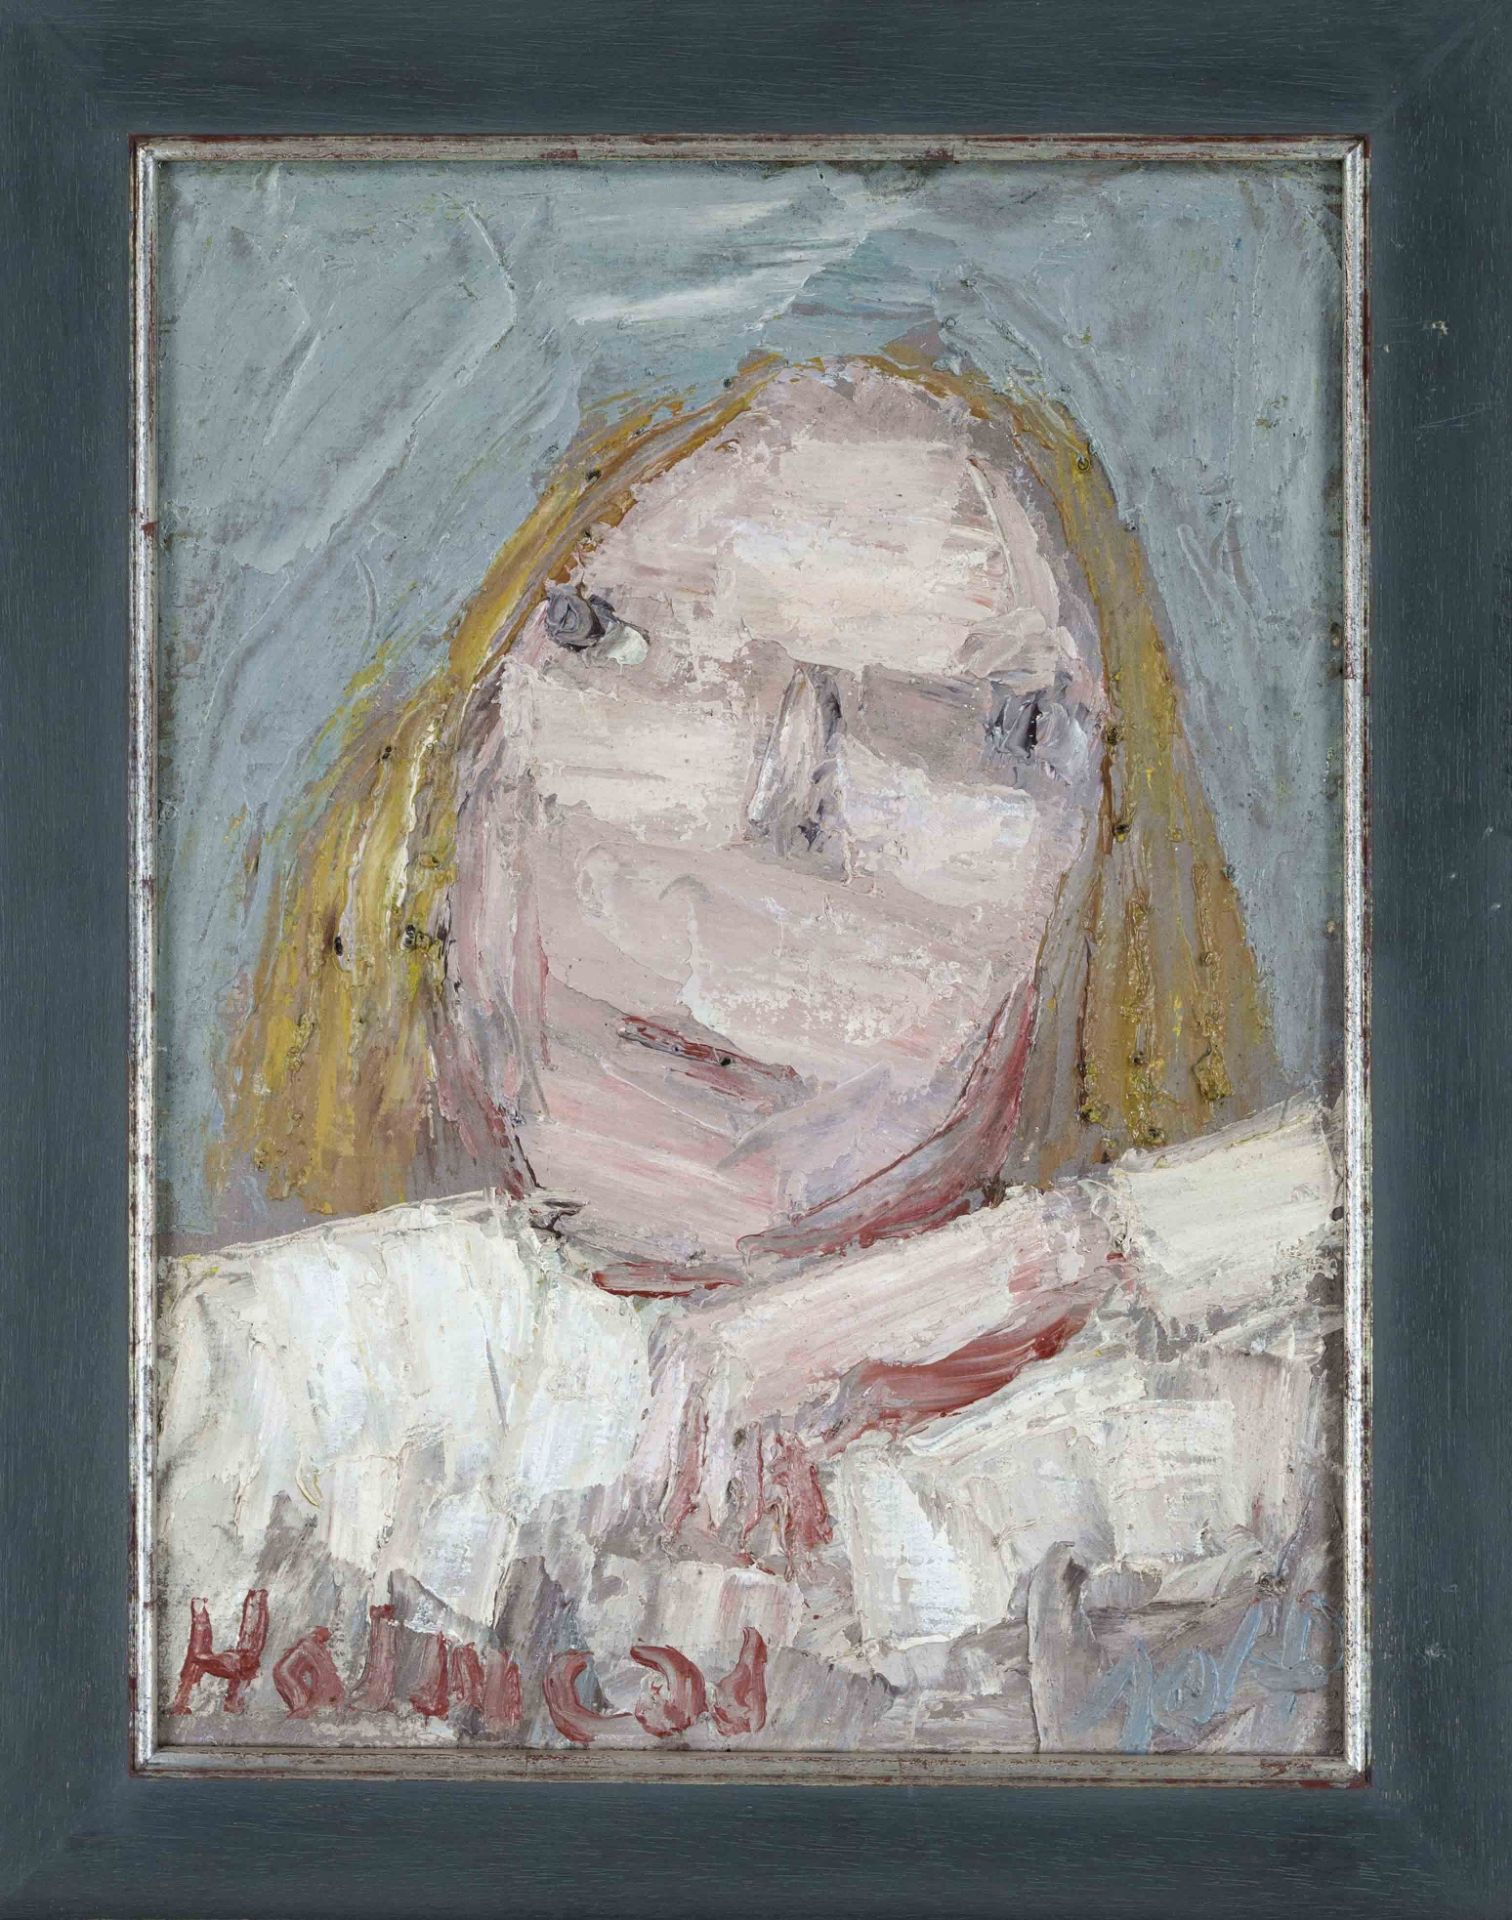 Holmead (i.e. Clifford Holmead Phillips) (1889-1975), Portrait of a Blonde Woman, 1970, oil on